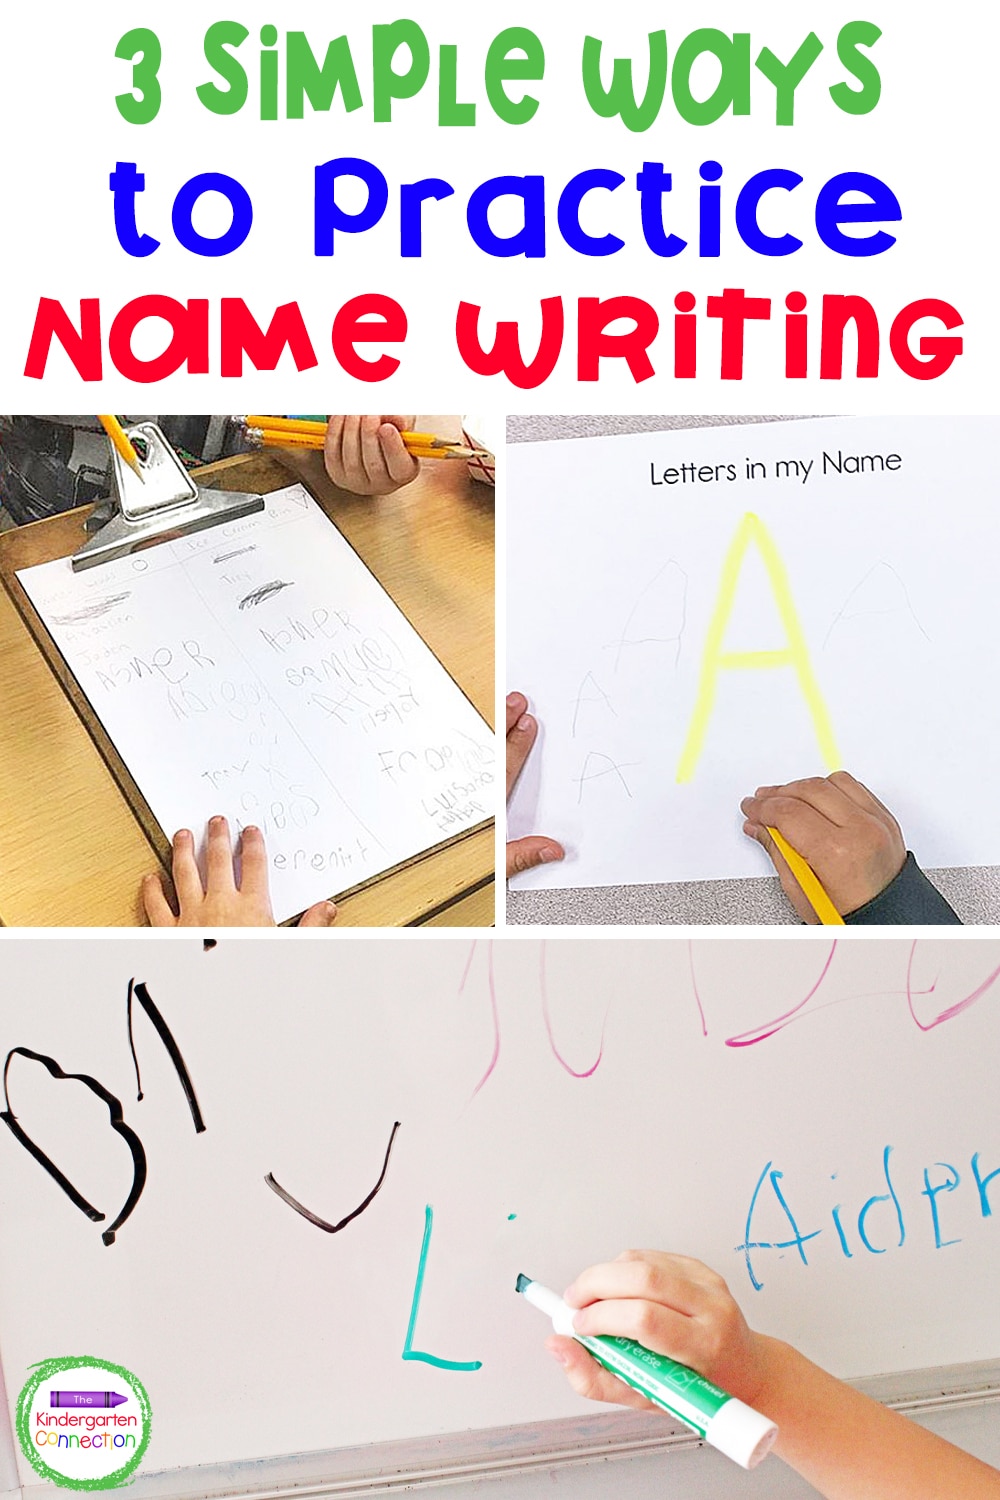 3 Simple Ways to Practice Name Writing